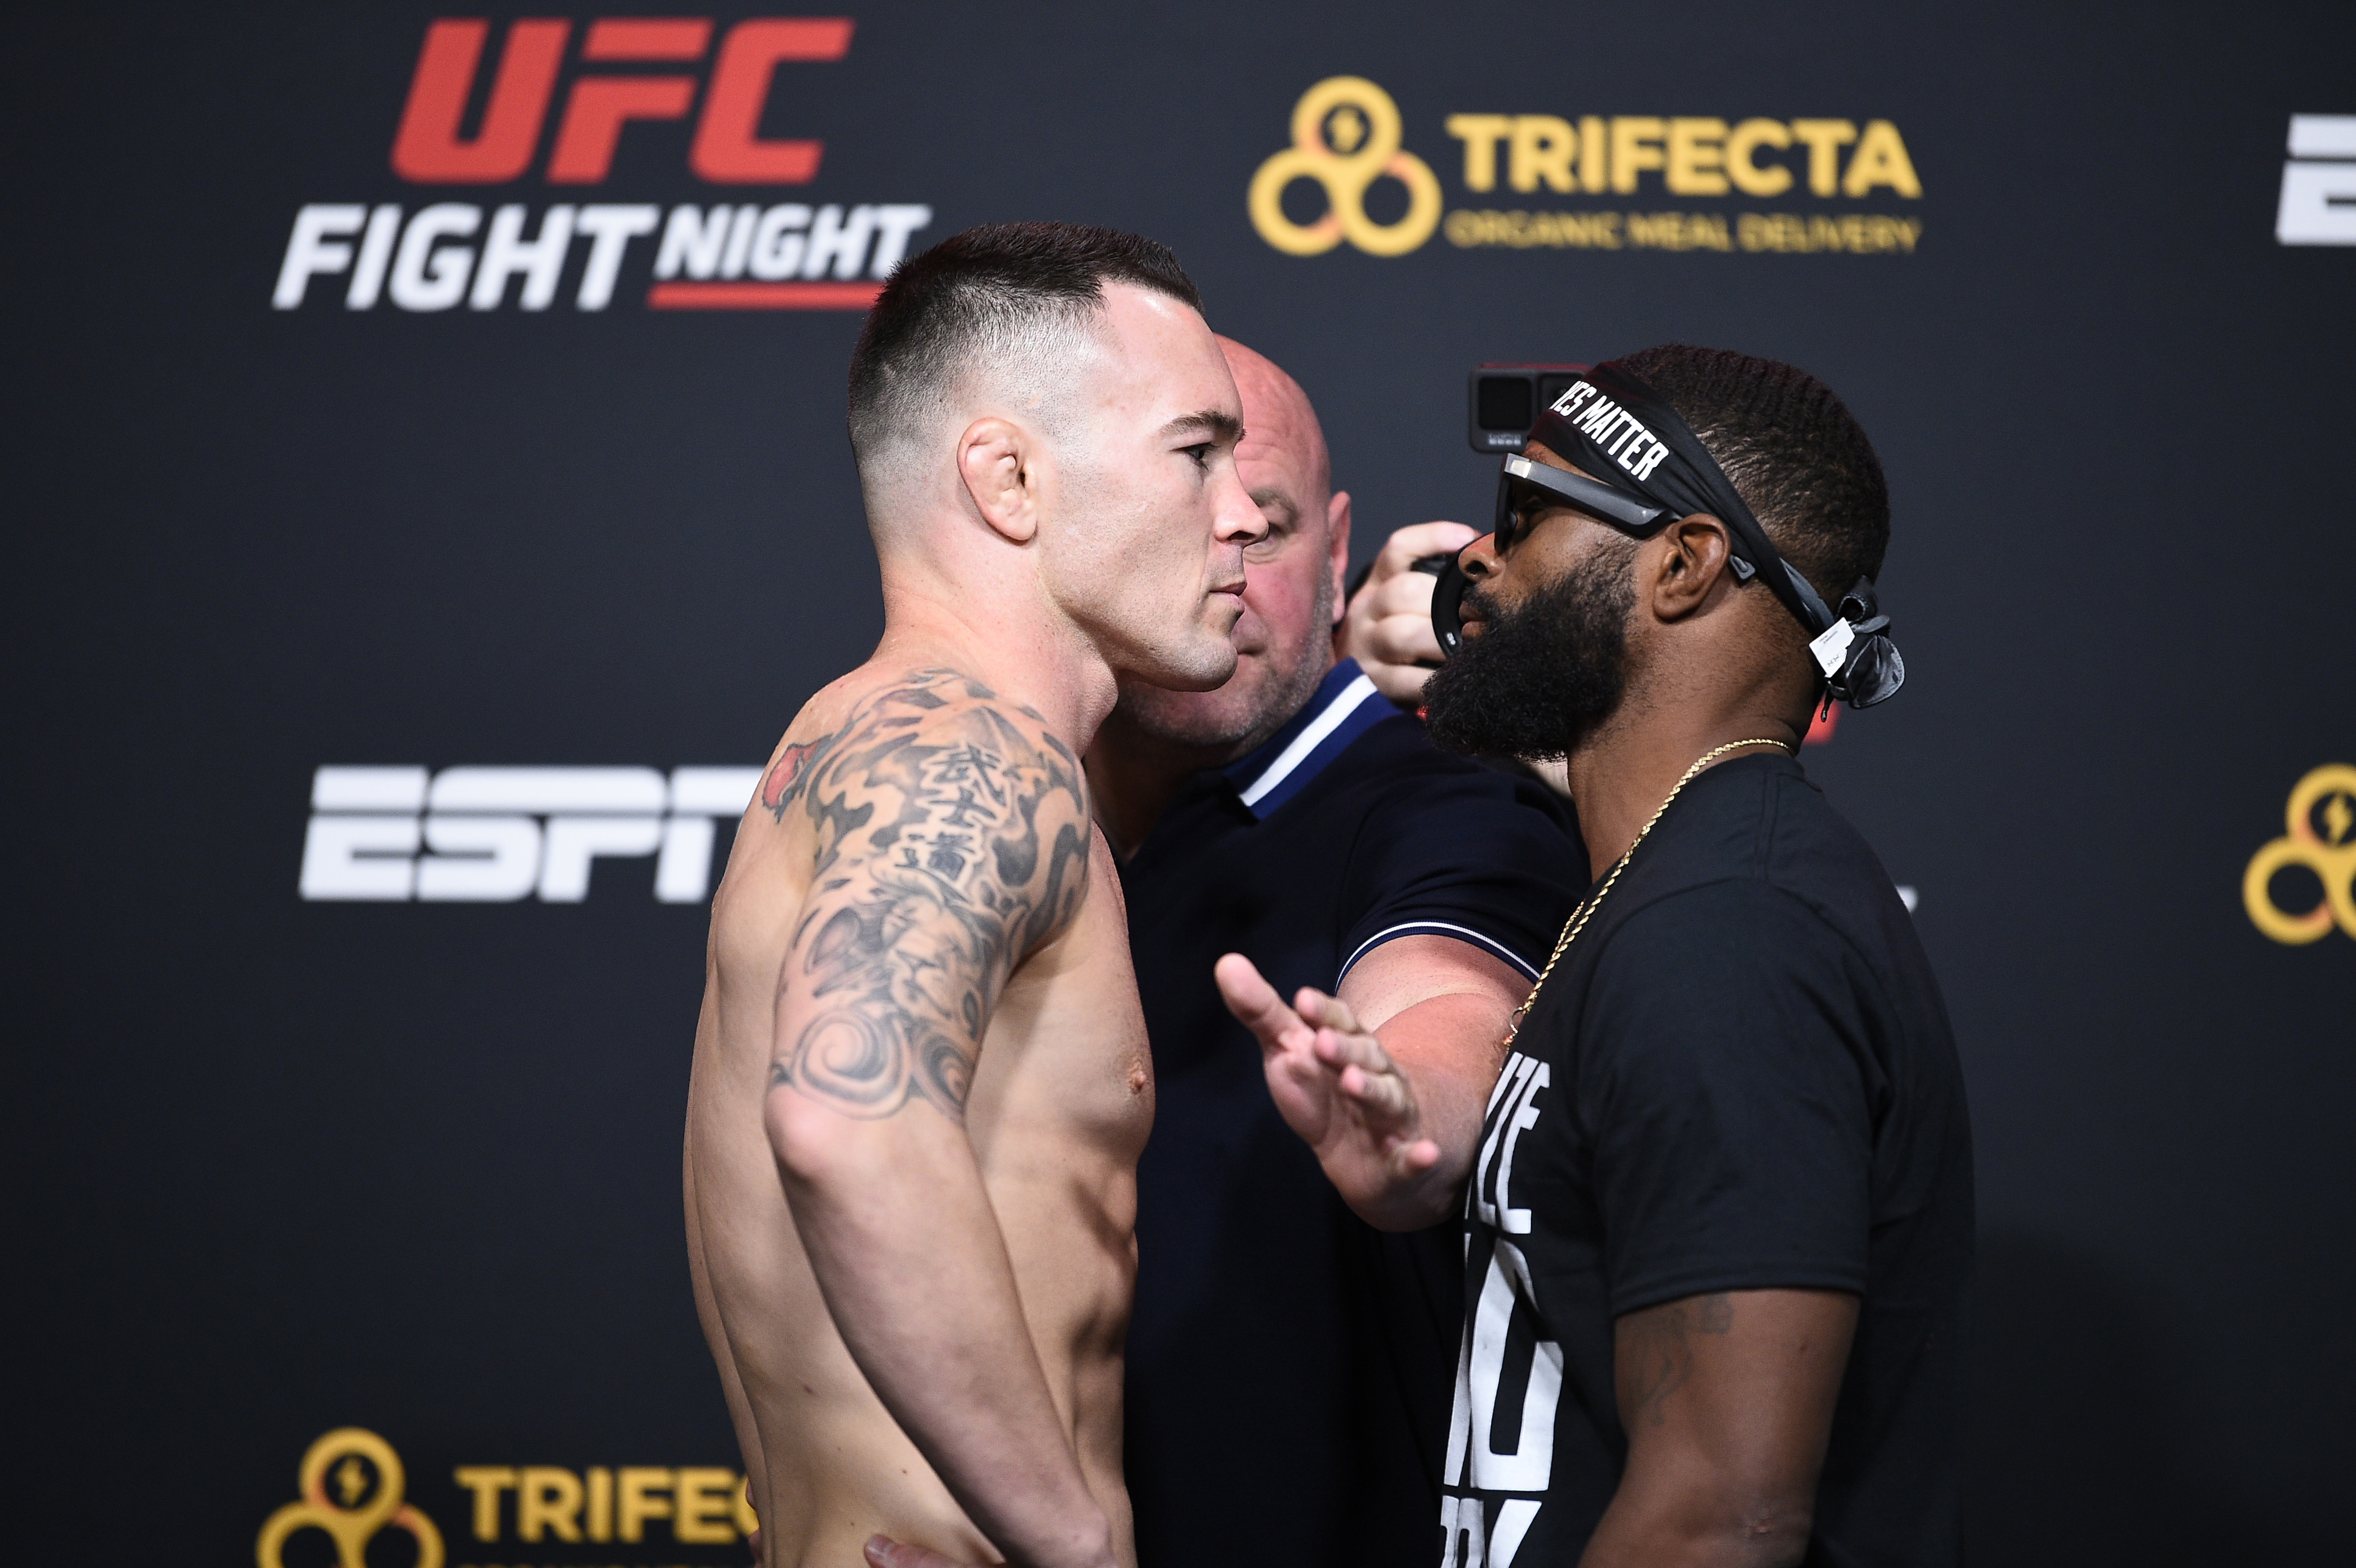 UFC Fight Night (9/19/20) How to watch, live stream Colby Covington vs